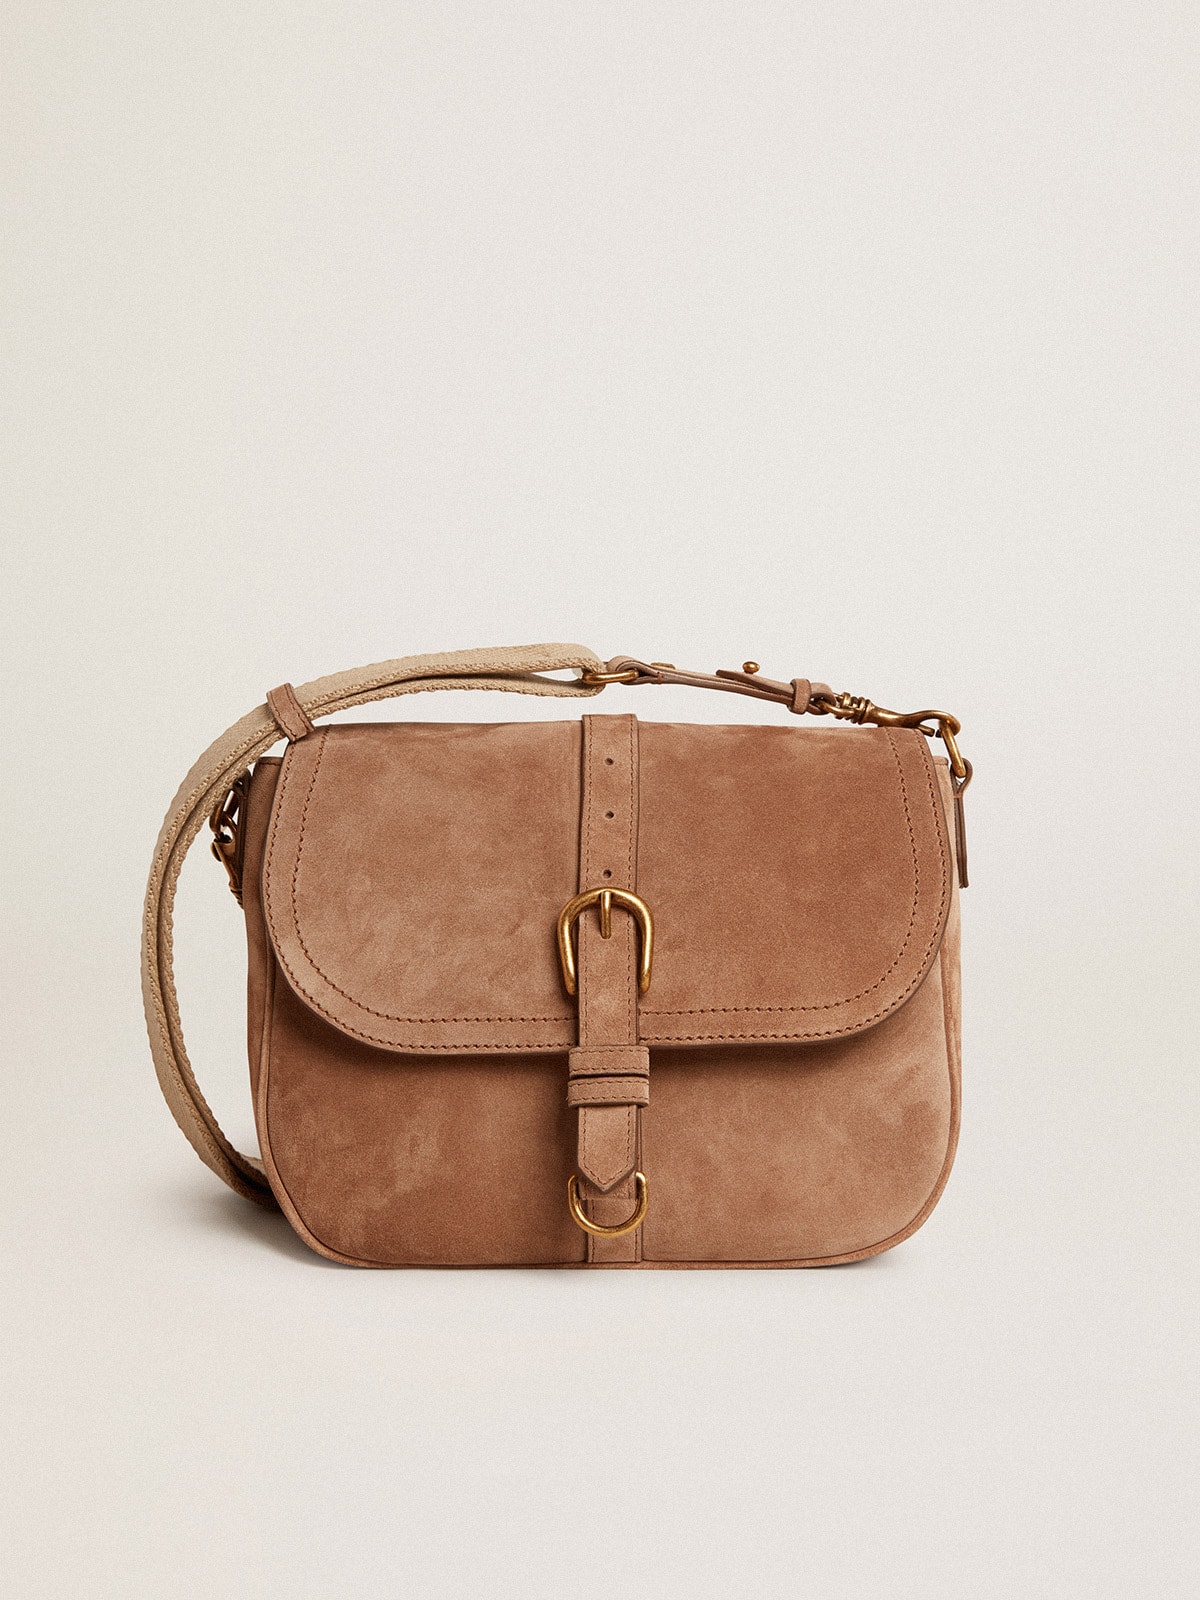 Golden Goose Medium Sally Bag In Ash-colored Suede With Contrasting Buckle And Shoulder Strap GBP800.0